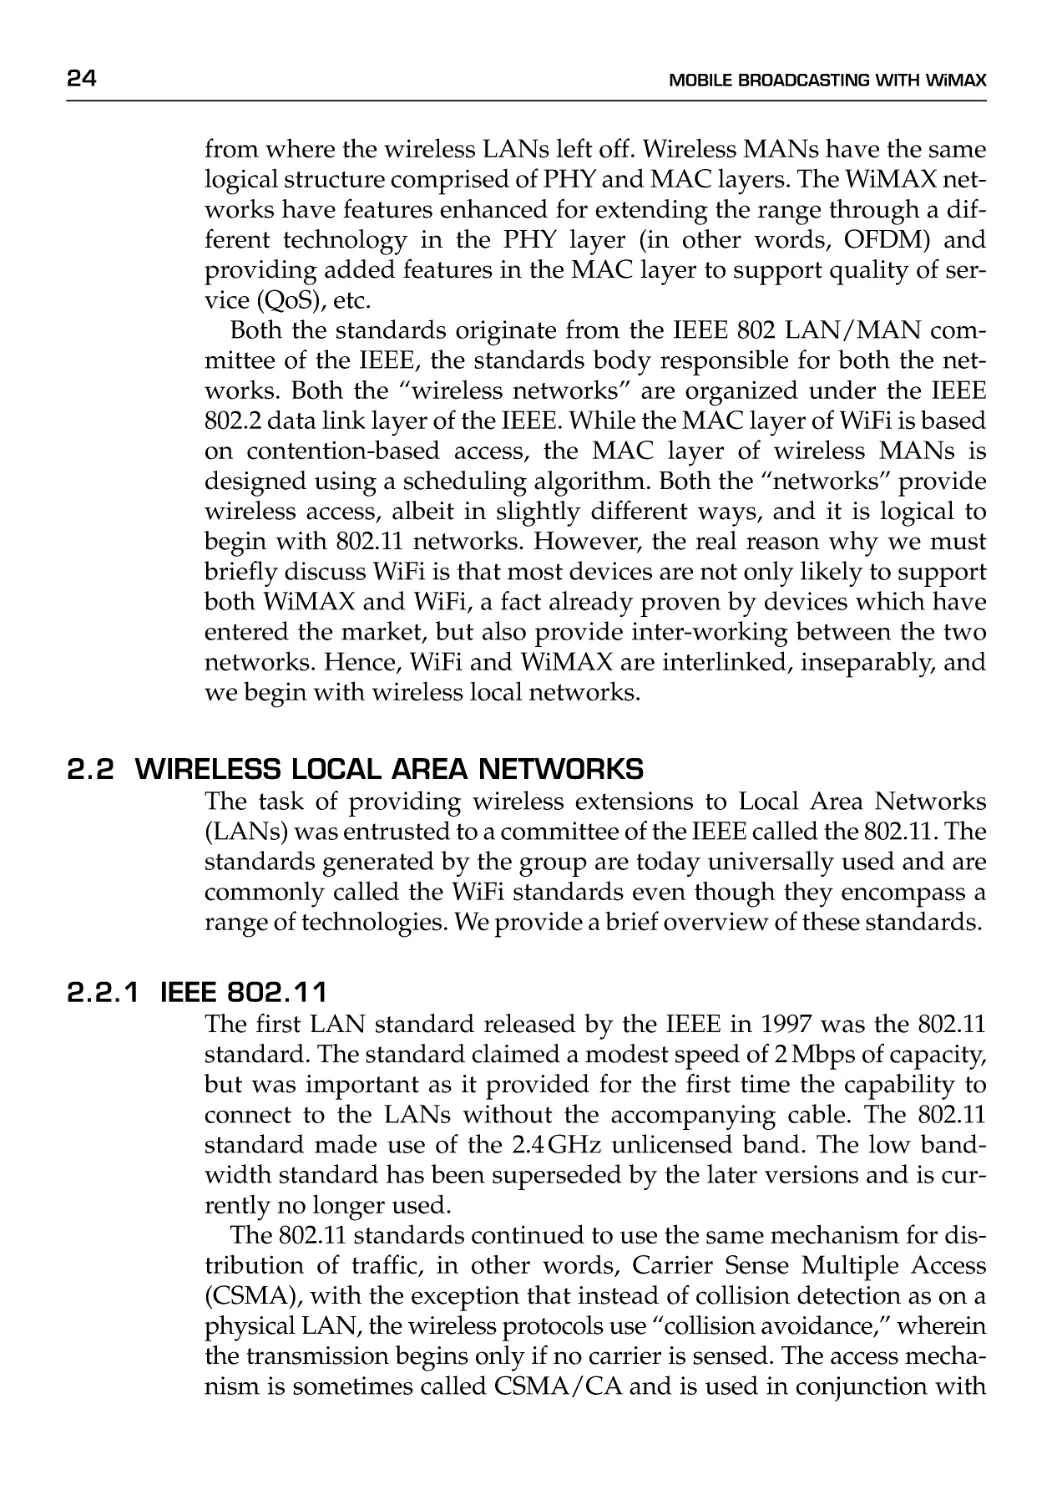 2.2 Wireless Local Area Networks